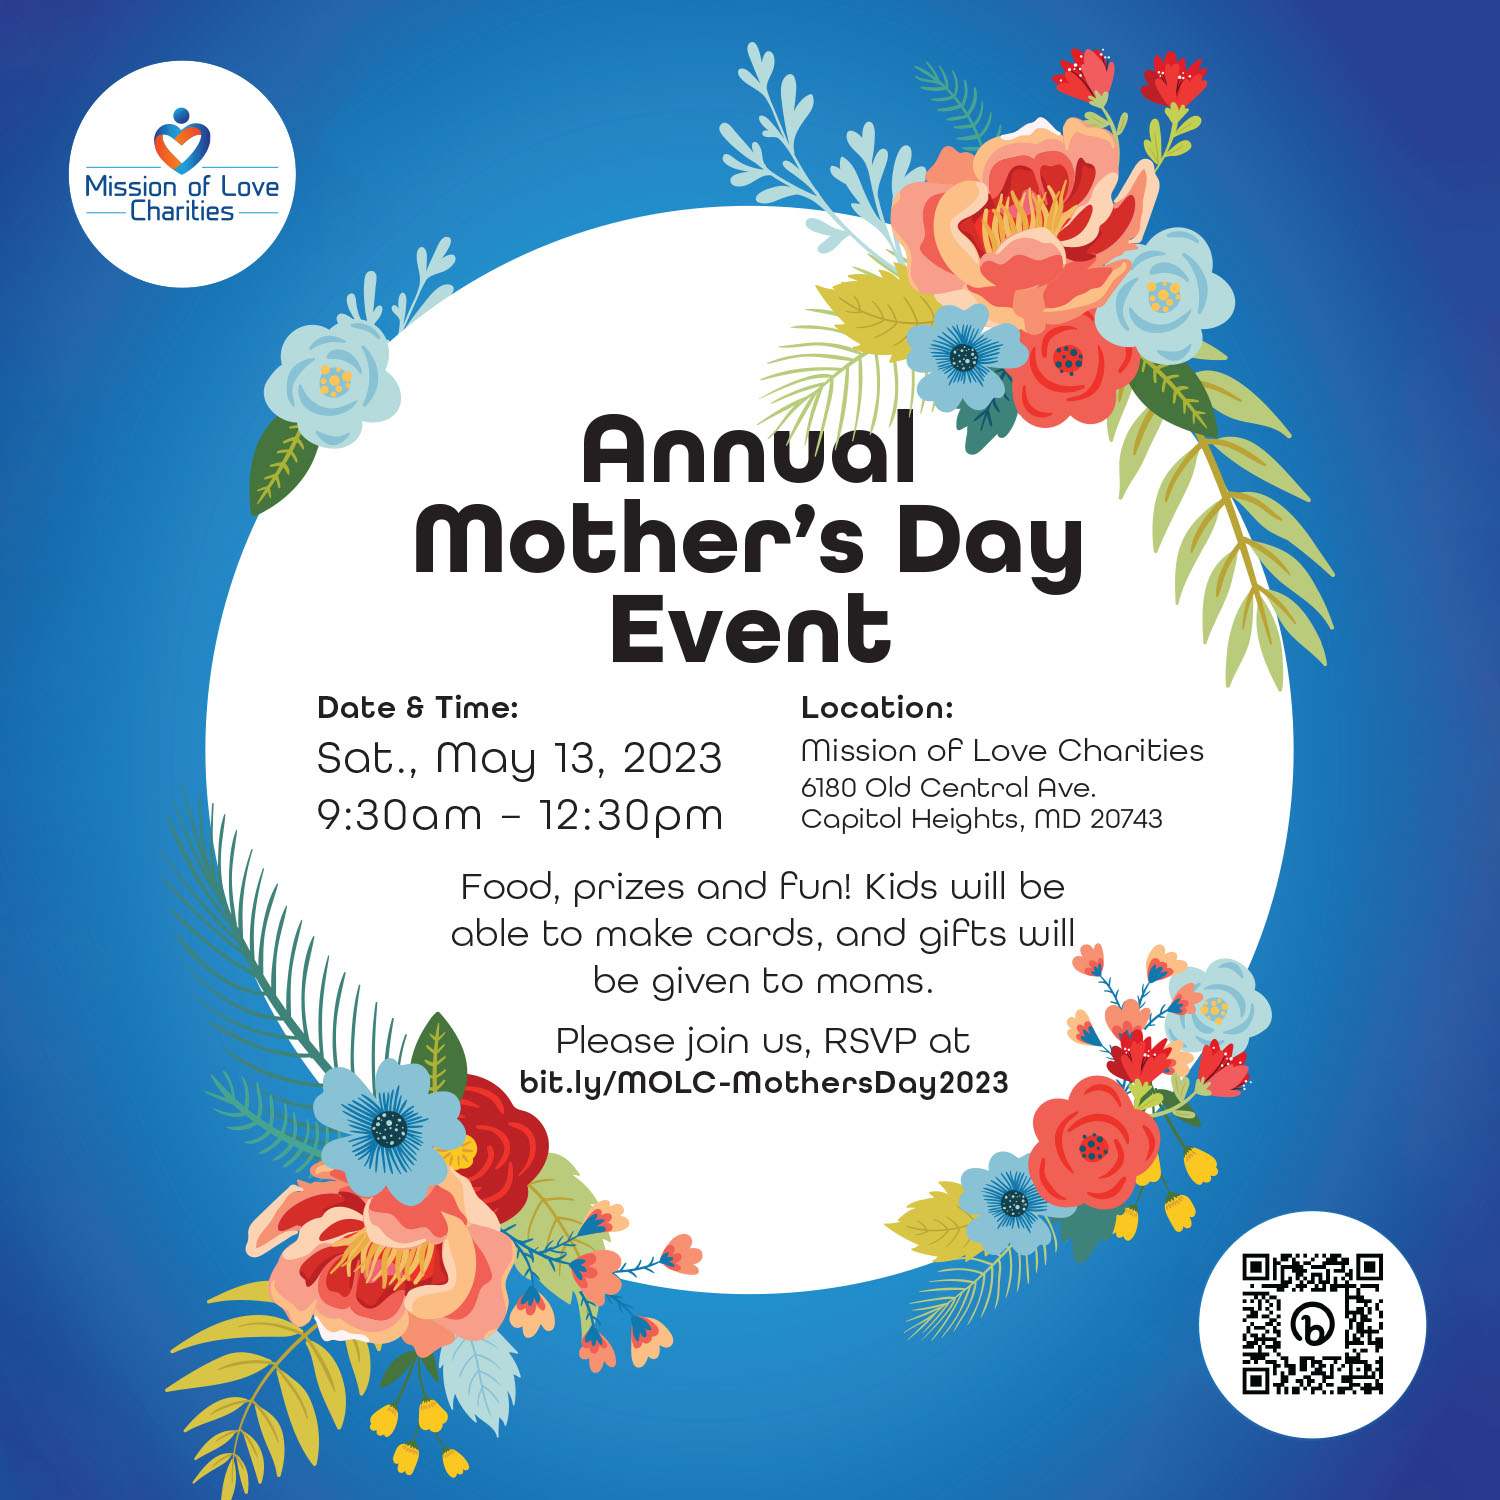 Annual Mother’s Day Event